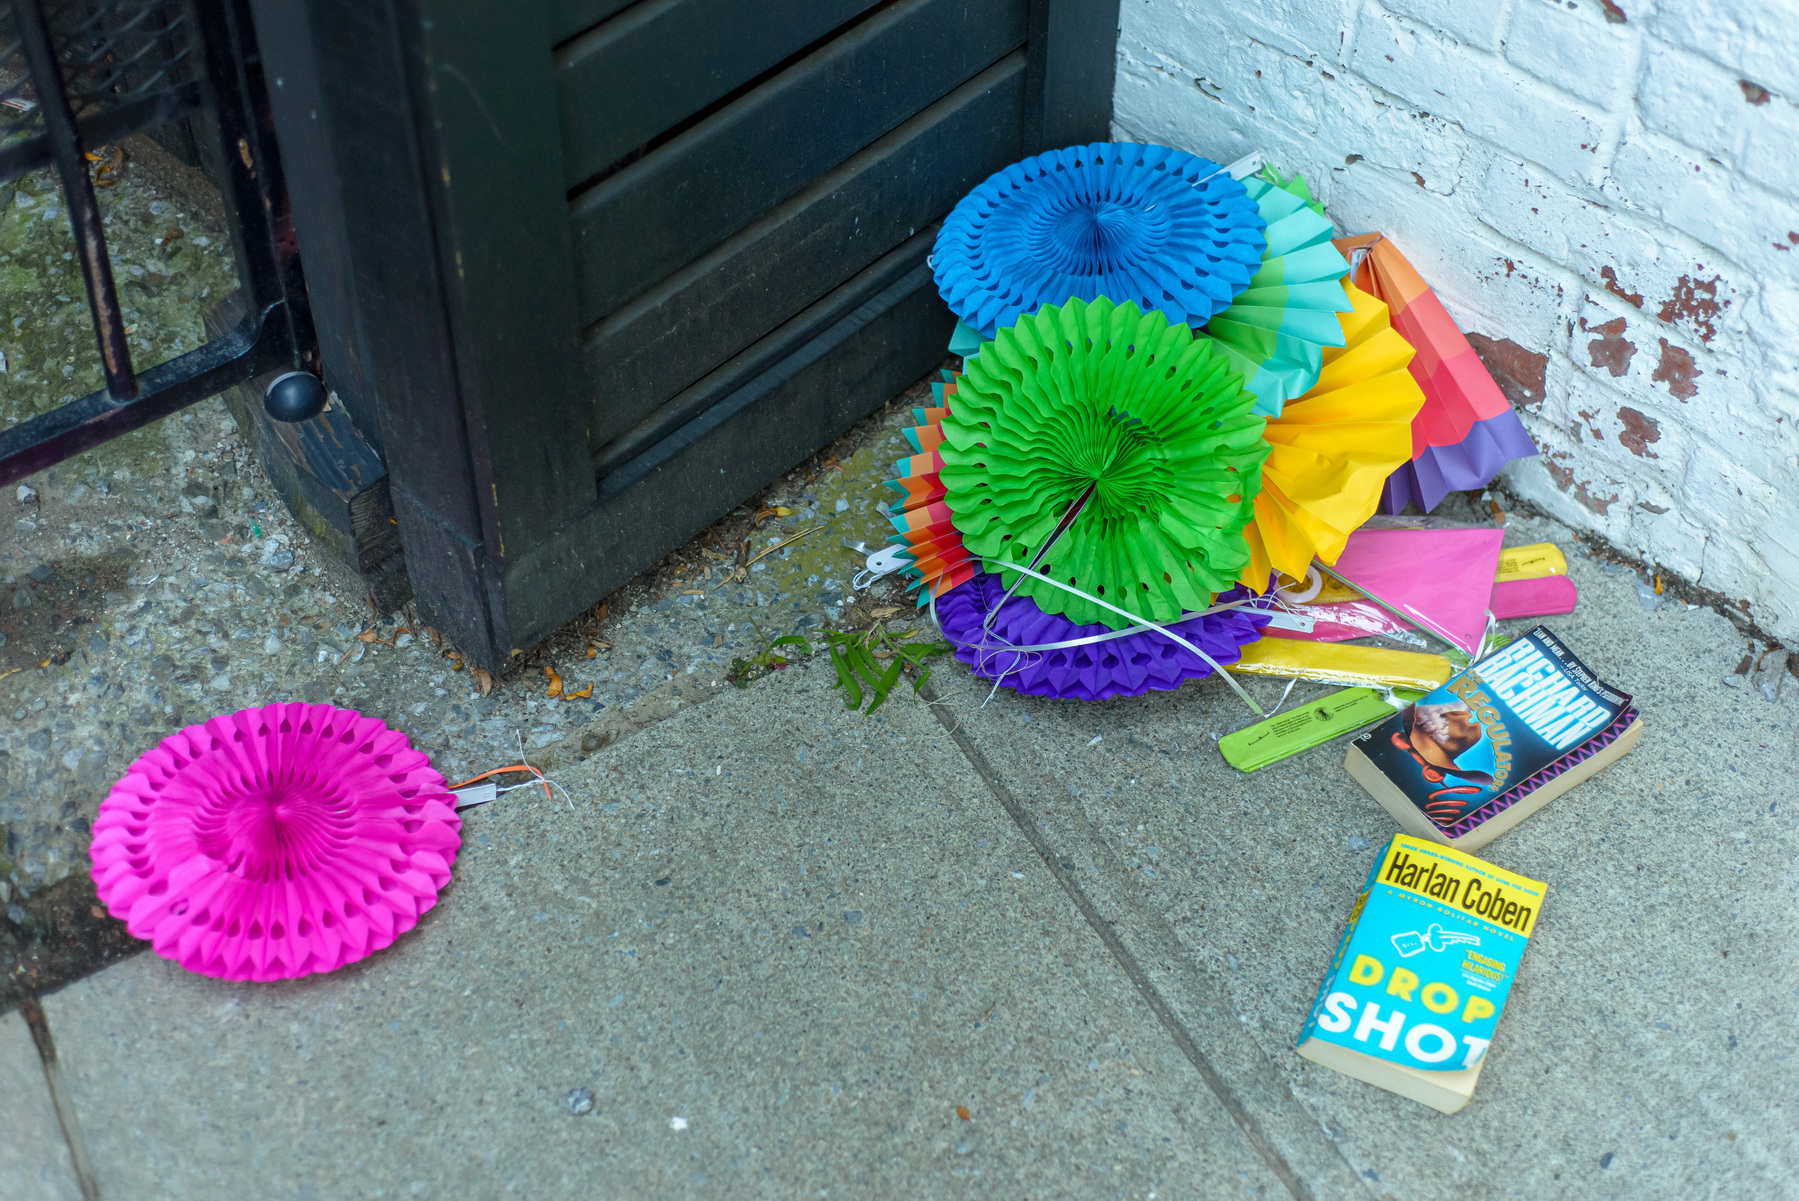 Colorful pinwheel decorations and books lying on the ground for people to take.